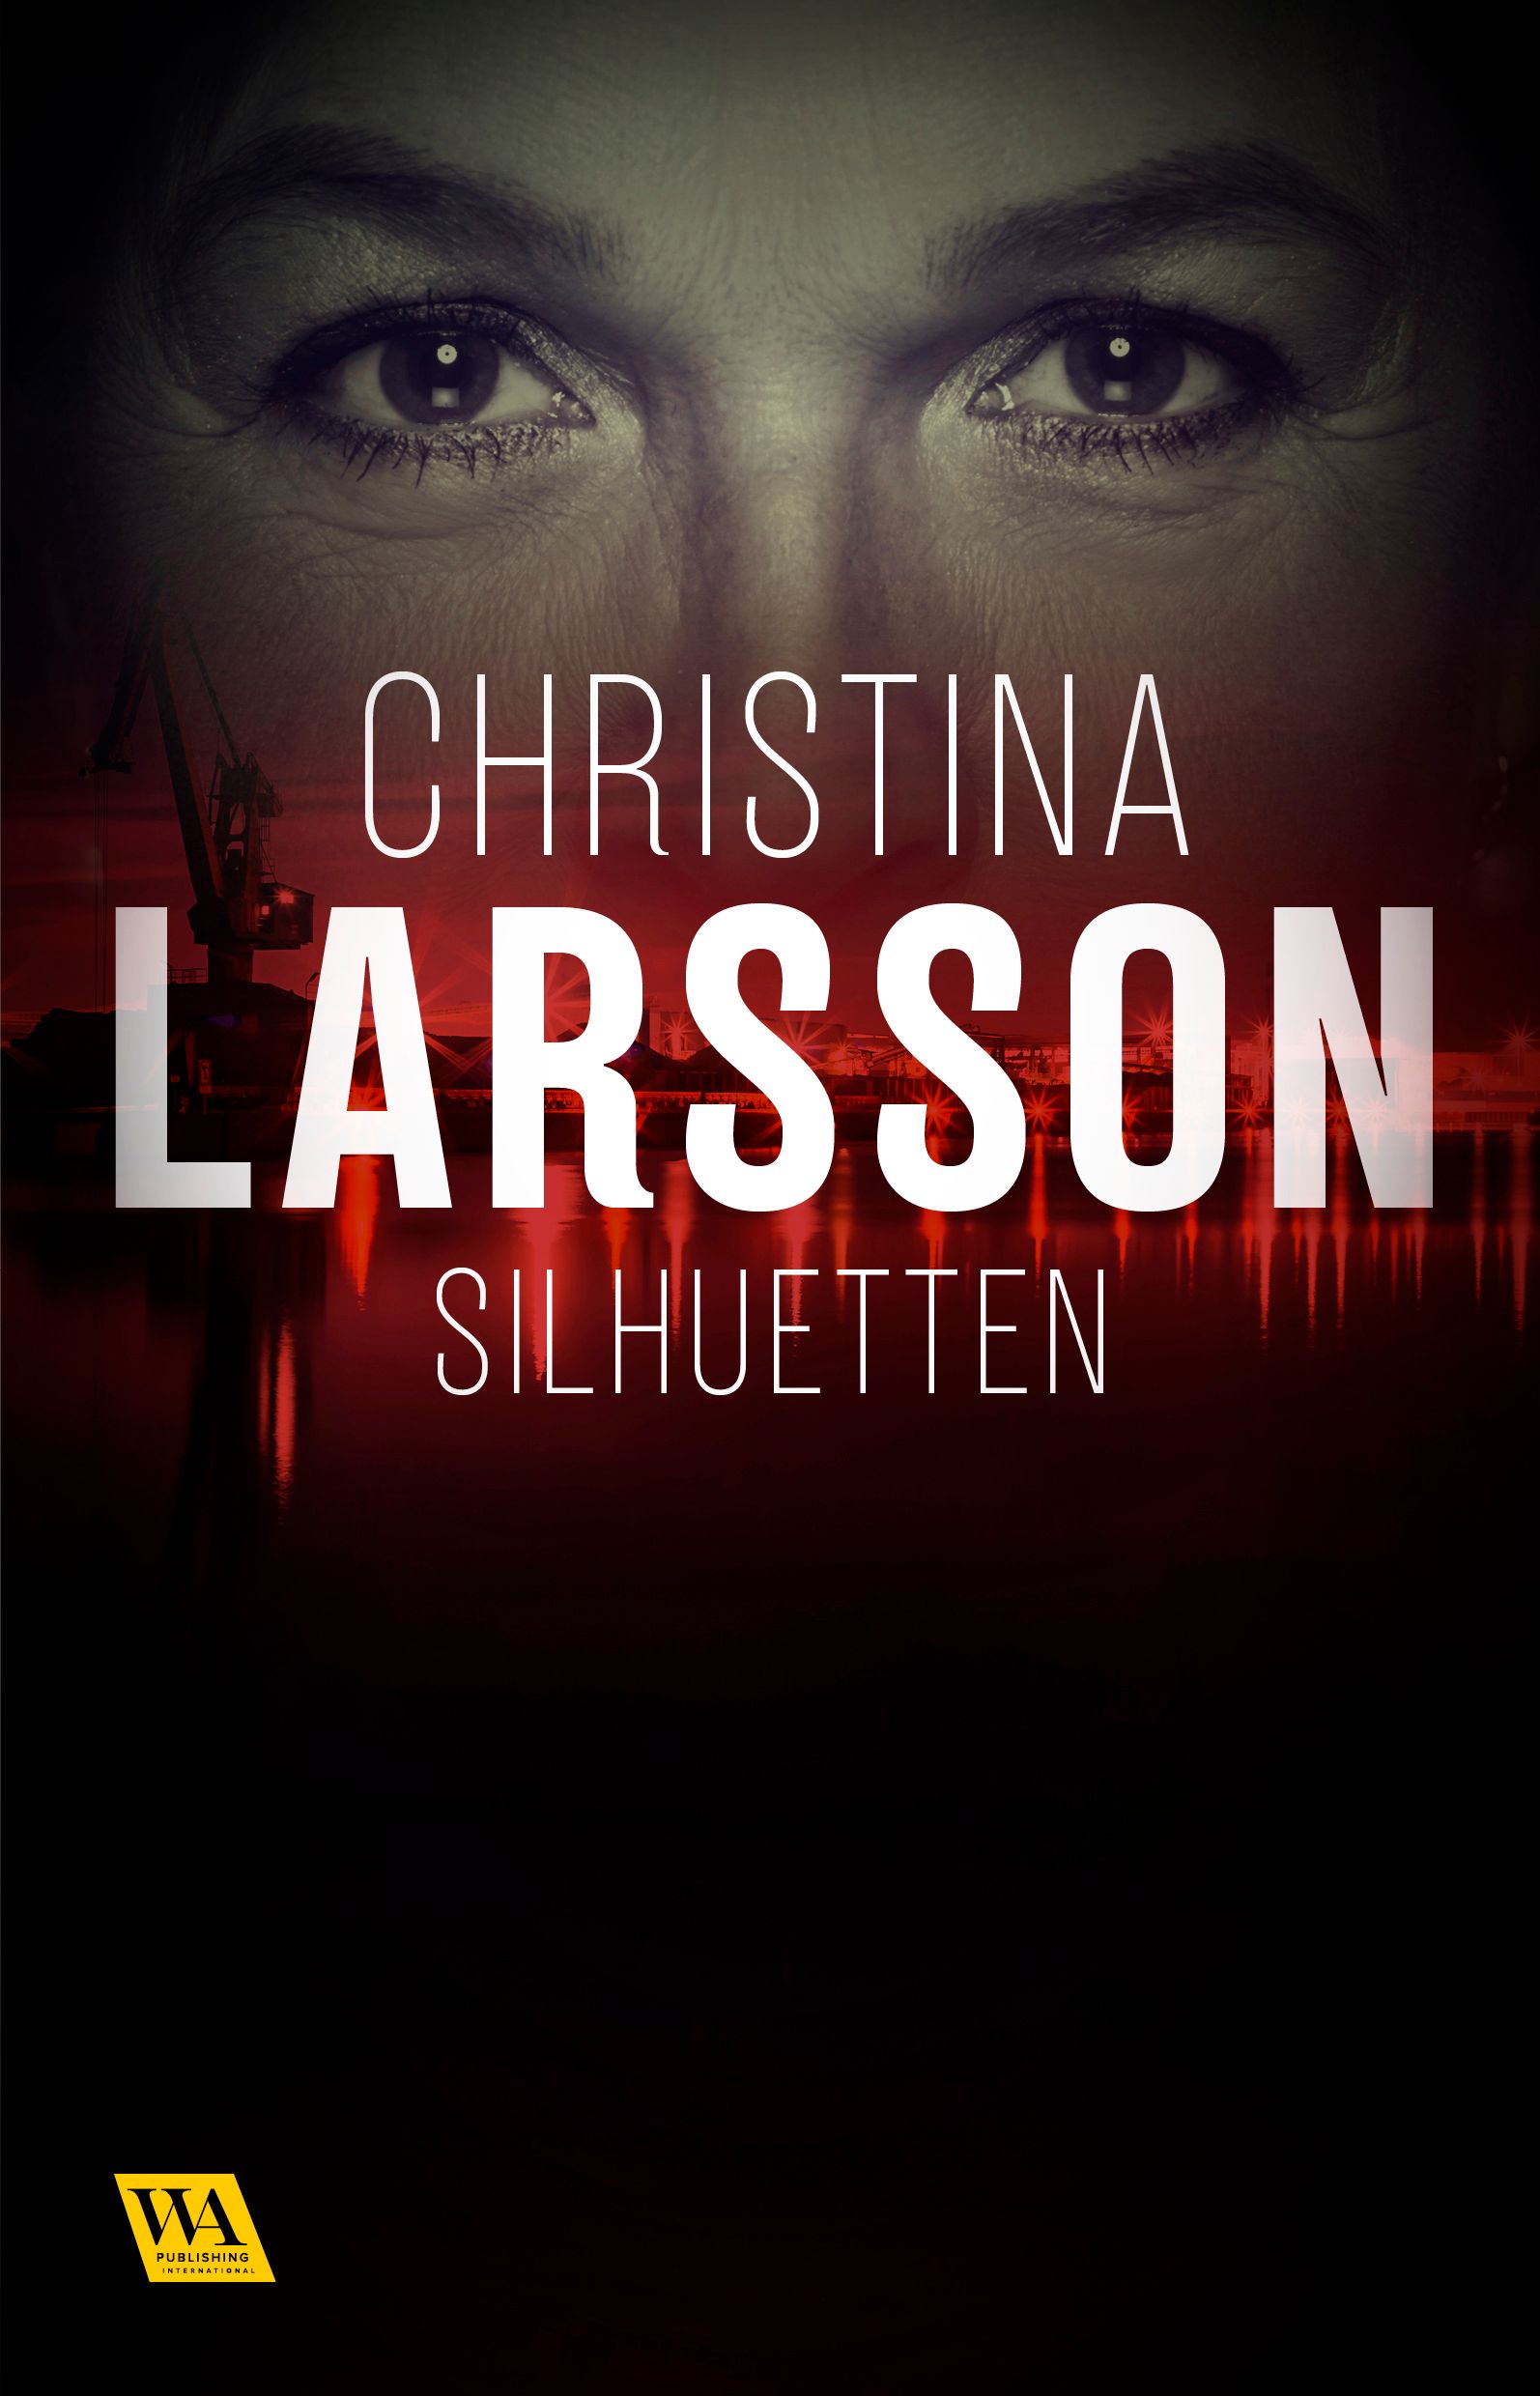 Silhuetten, eBook by Christina Larsson